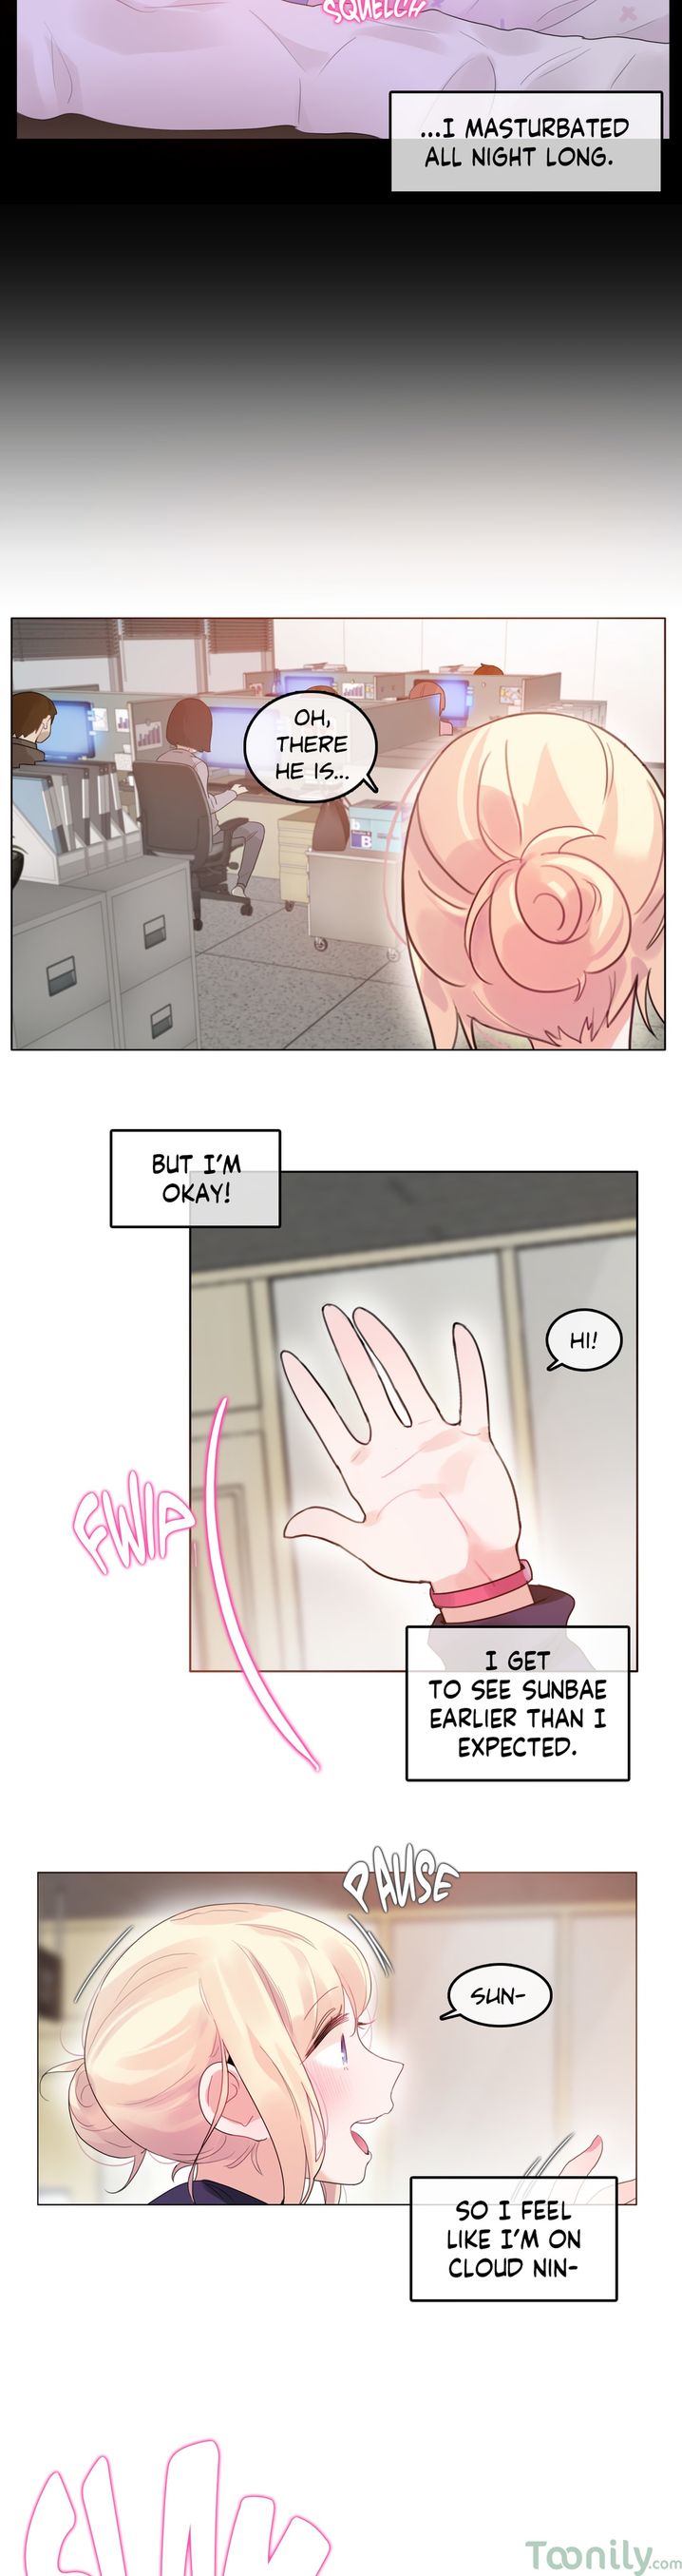 A Pervert’s Daily Life - Chapter 53 Page 3